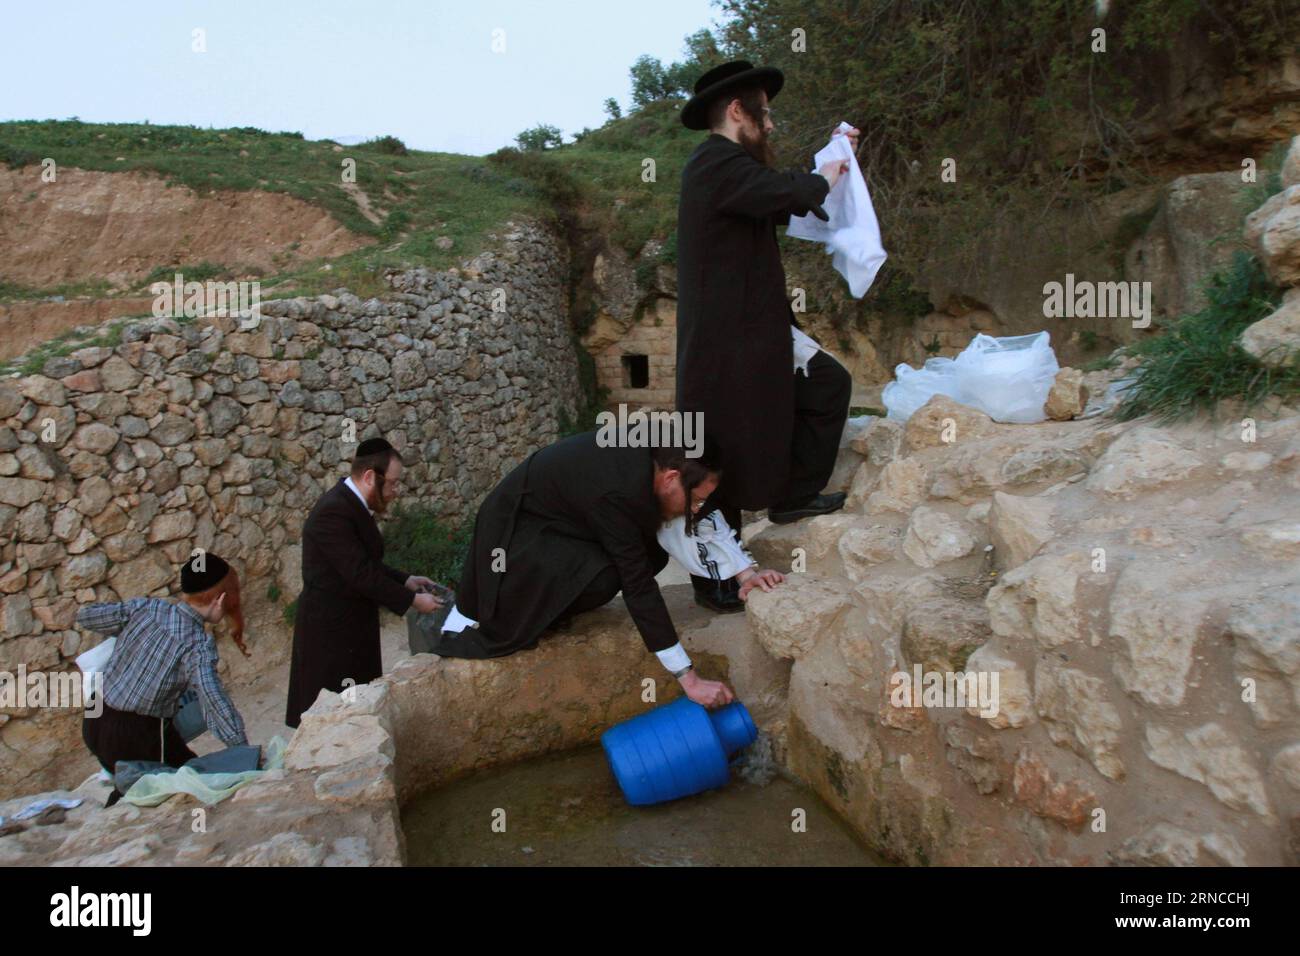 (160404) -- JERUSALEM, April 4, 2016 -- Ultra-Orthodox Jews collect water from a mountain spring near Jerusalem to be used in baking unleavened bread, known as matzoth, during the Maim Shelanu (Rested Water) ceremony on April 4, 2016. Religious Jews throughout the world eat matzoth during the eight-day Pesach holiday (Passover), which begins on April 22, with the sunset to commemorate the Israelis exodus from Egypt some 3,500 years ago and commemorate their ancestors plight by refraining from eating leavened food products. ) MIDEAST-JERUSALEM-PASSOVER PREPARATION GilxCohenxMagen PUBLICATIONxNO Stock Photo